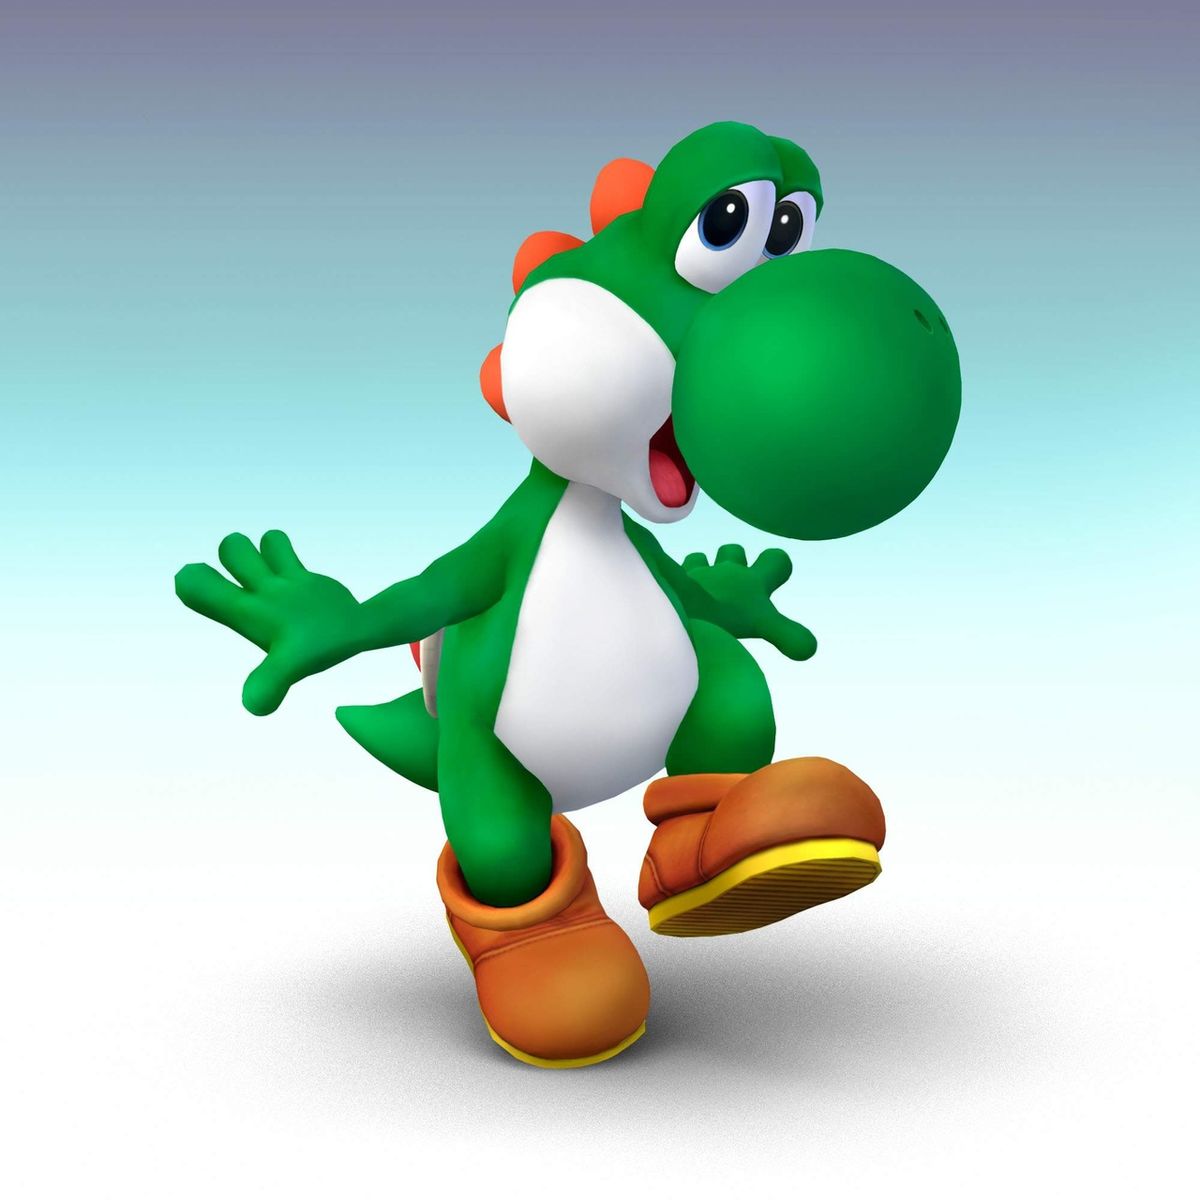 yoshi with wings